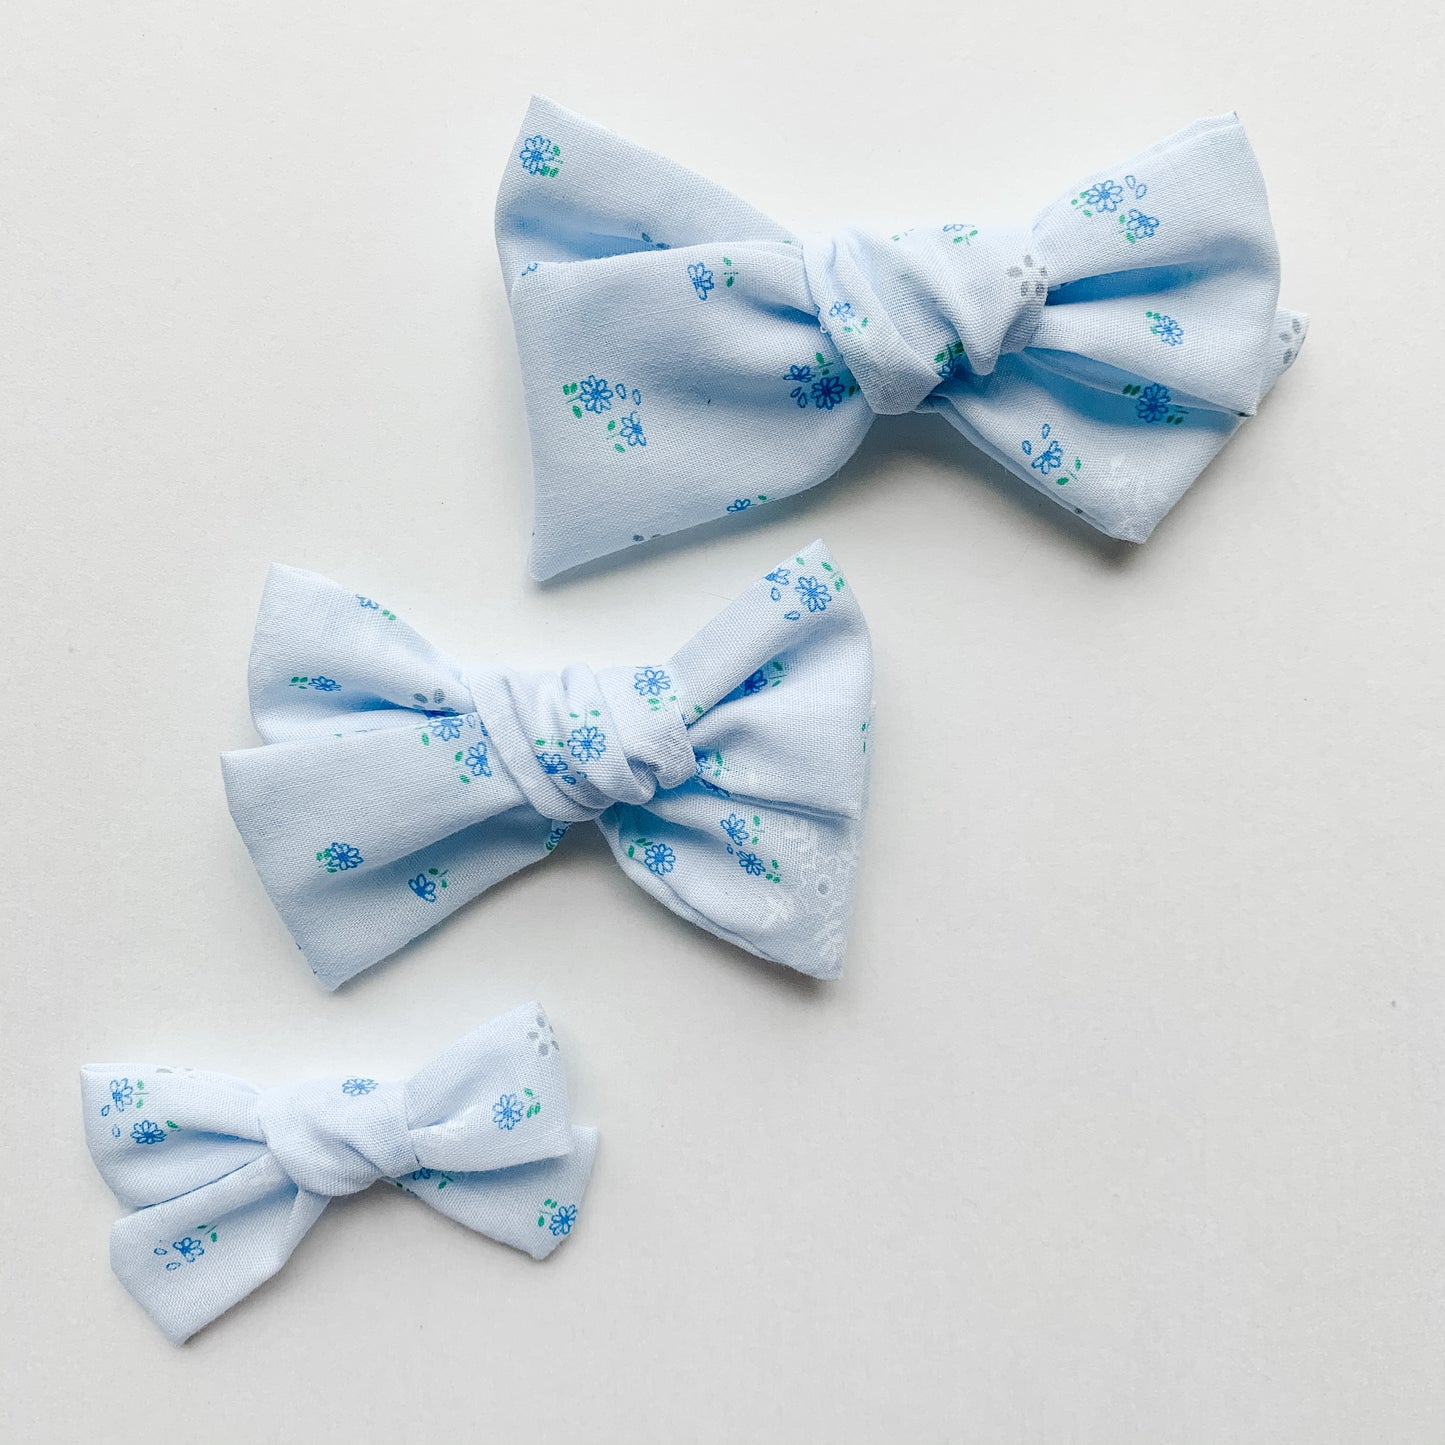 Victoria - Hand Tied Blue Sheer Bow